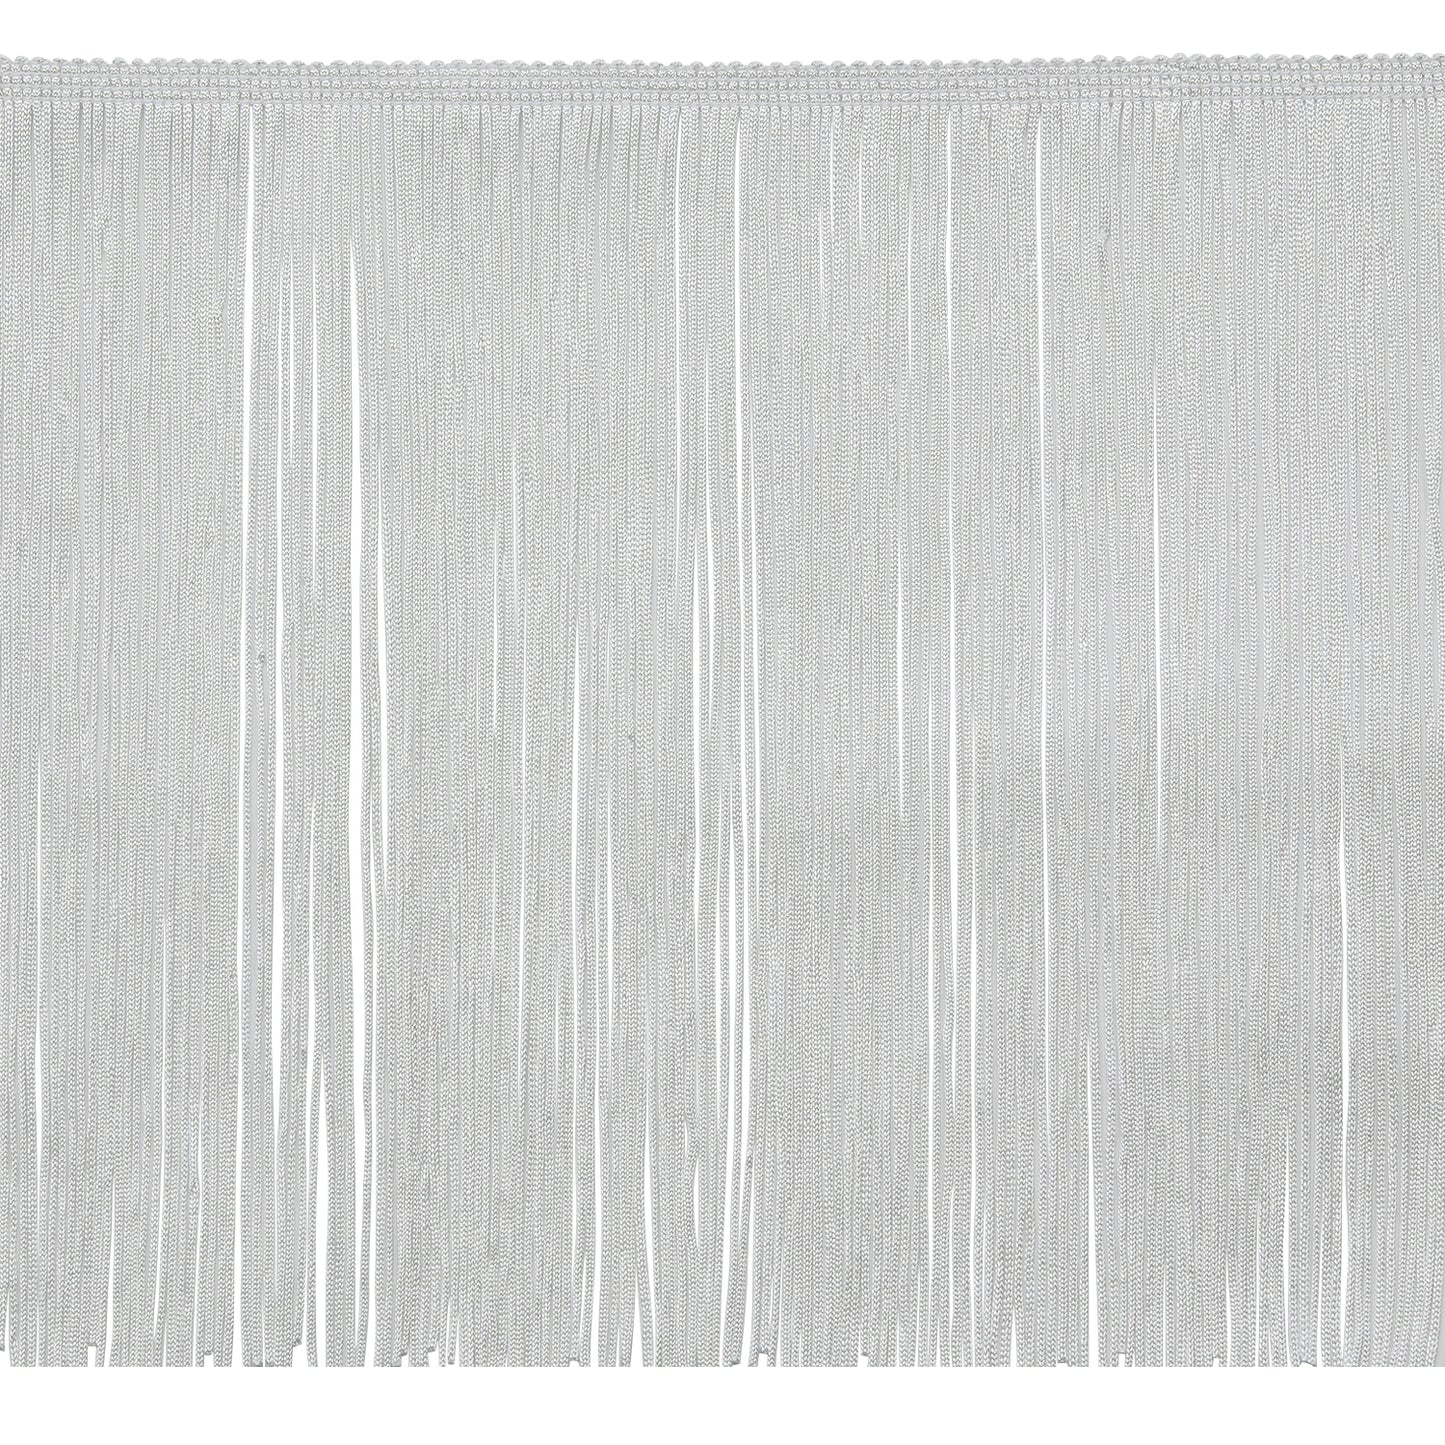 8" Chainette Fringe Trim (Sold by the Yard)